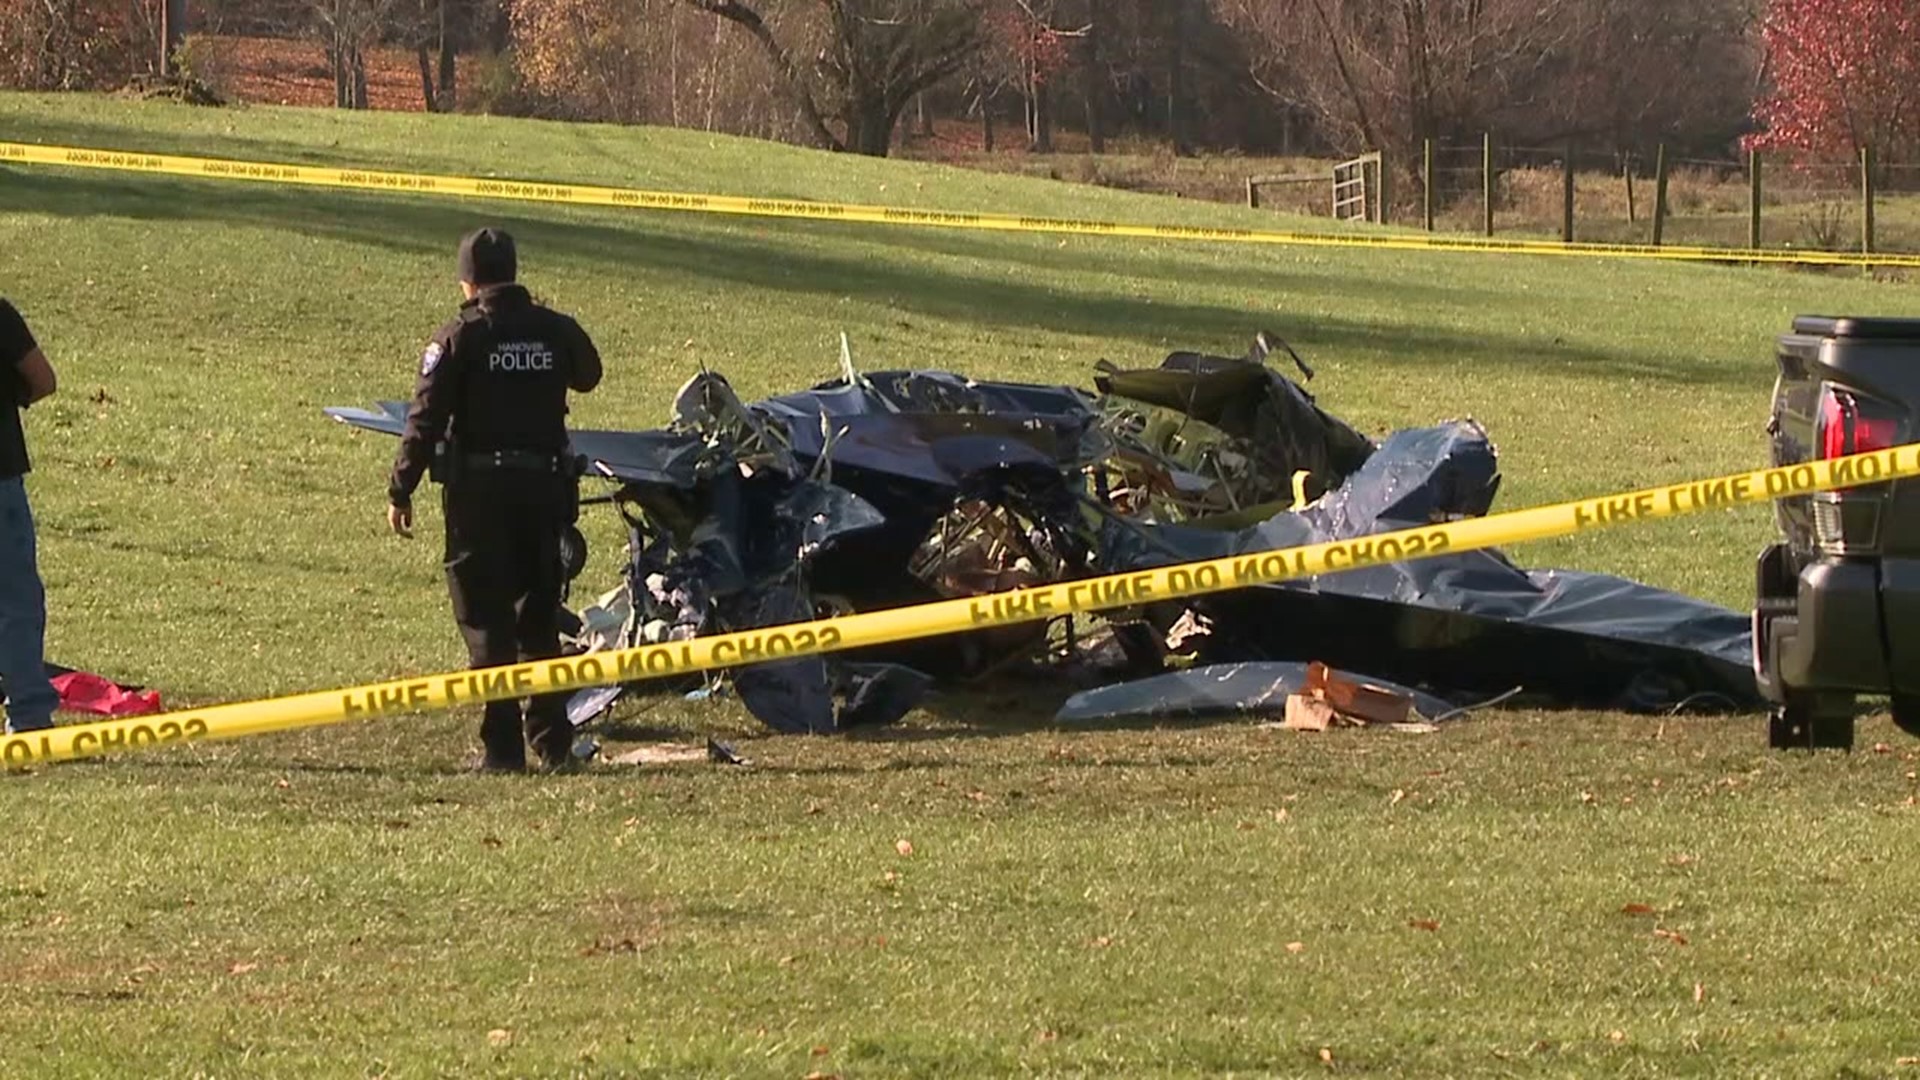 According to a report from the NTSB, two people who were killed in a plane crash last month in Luzerne County were in an experimental craft.